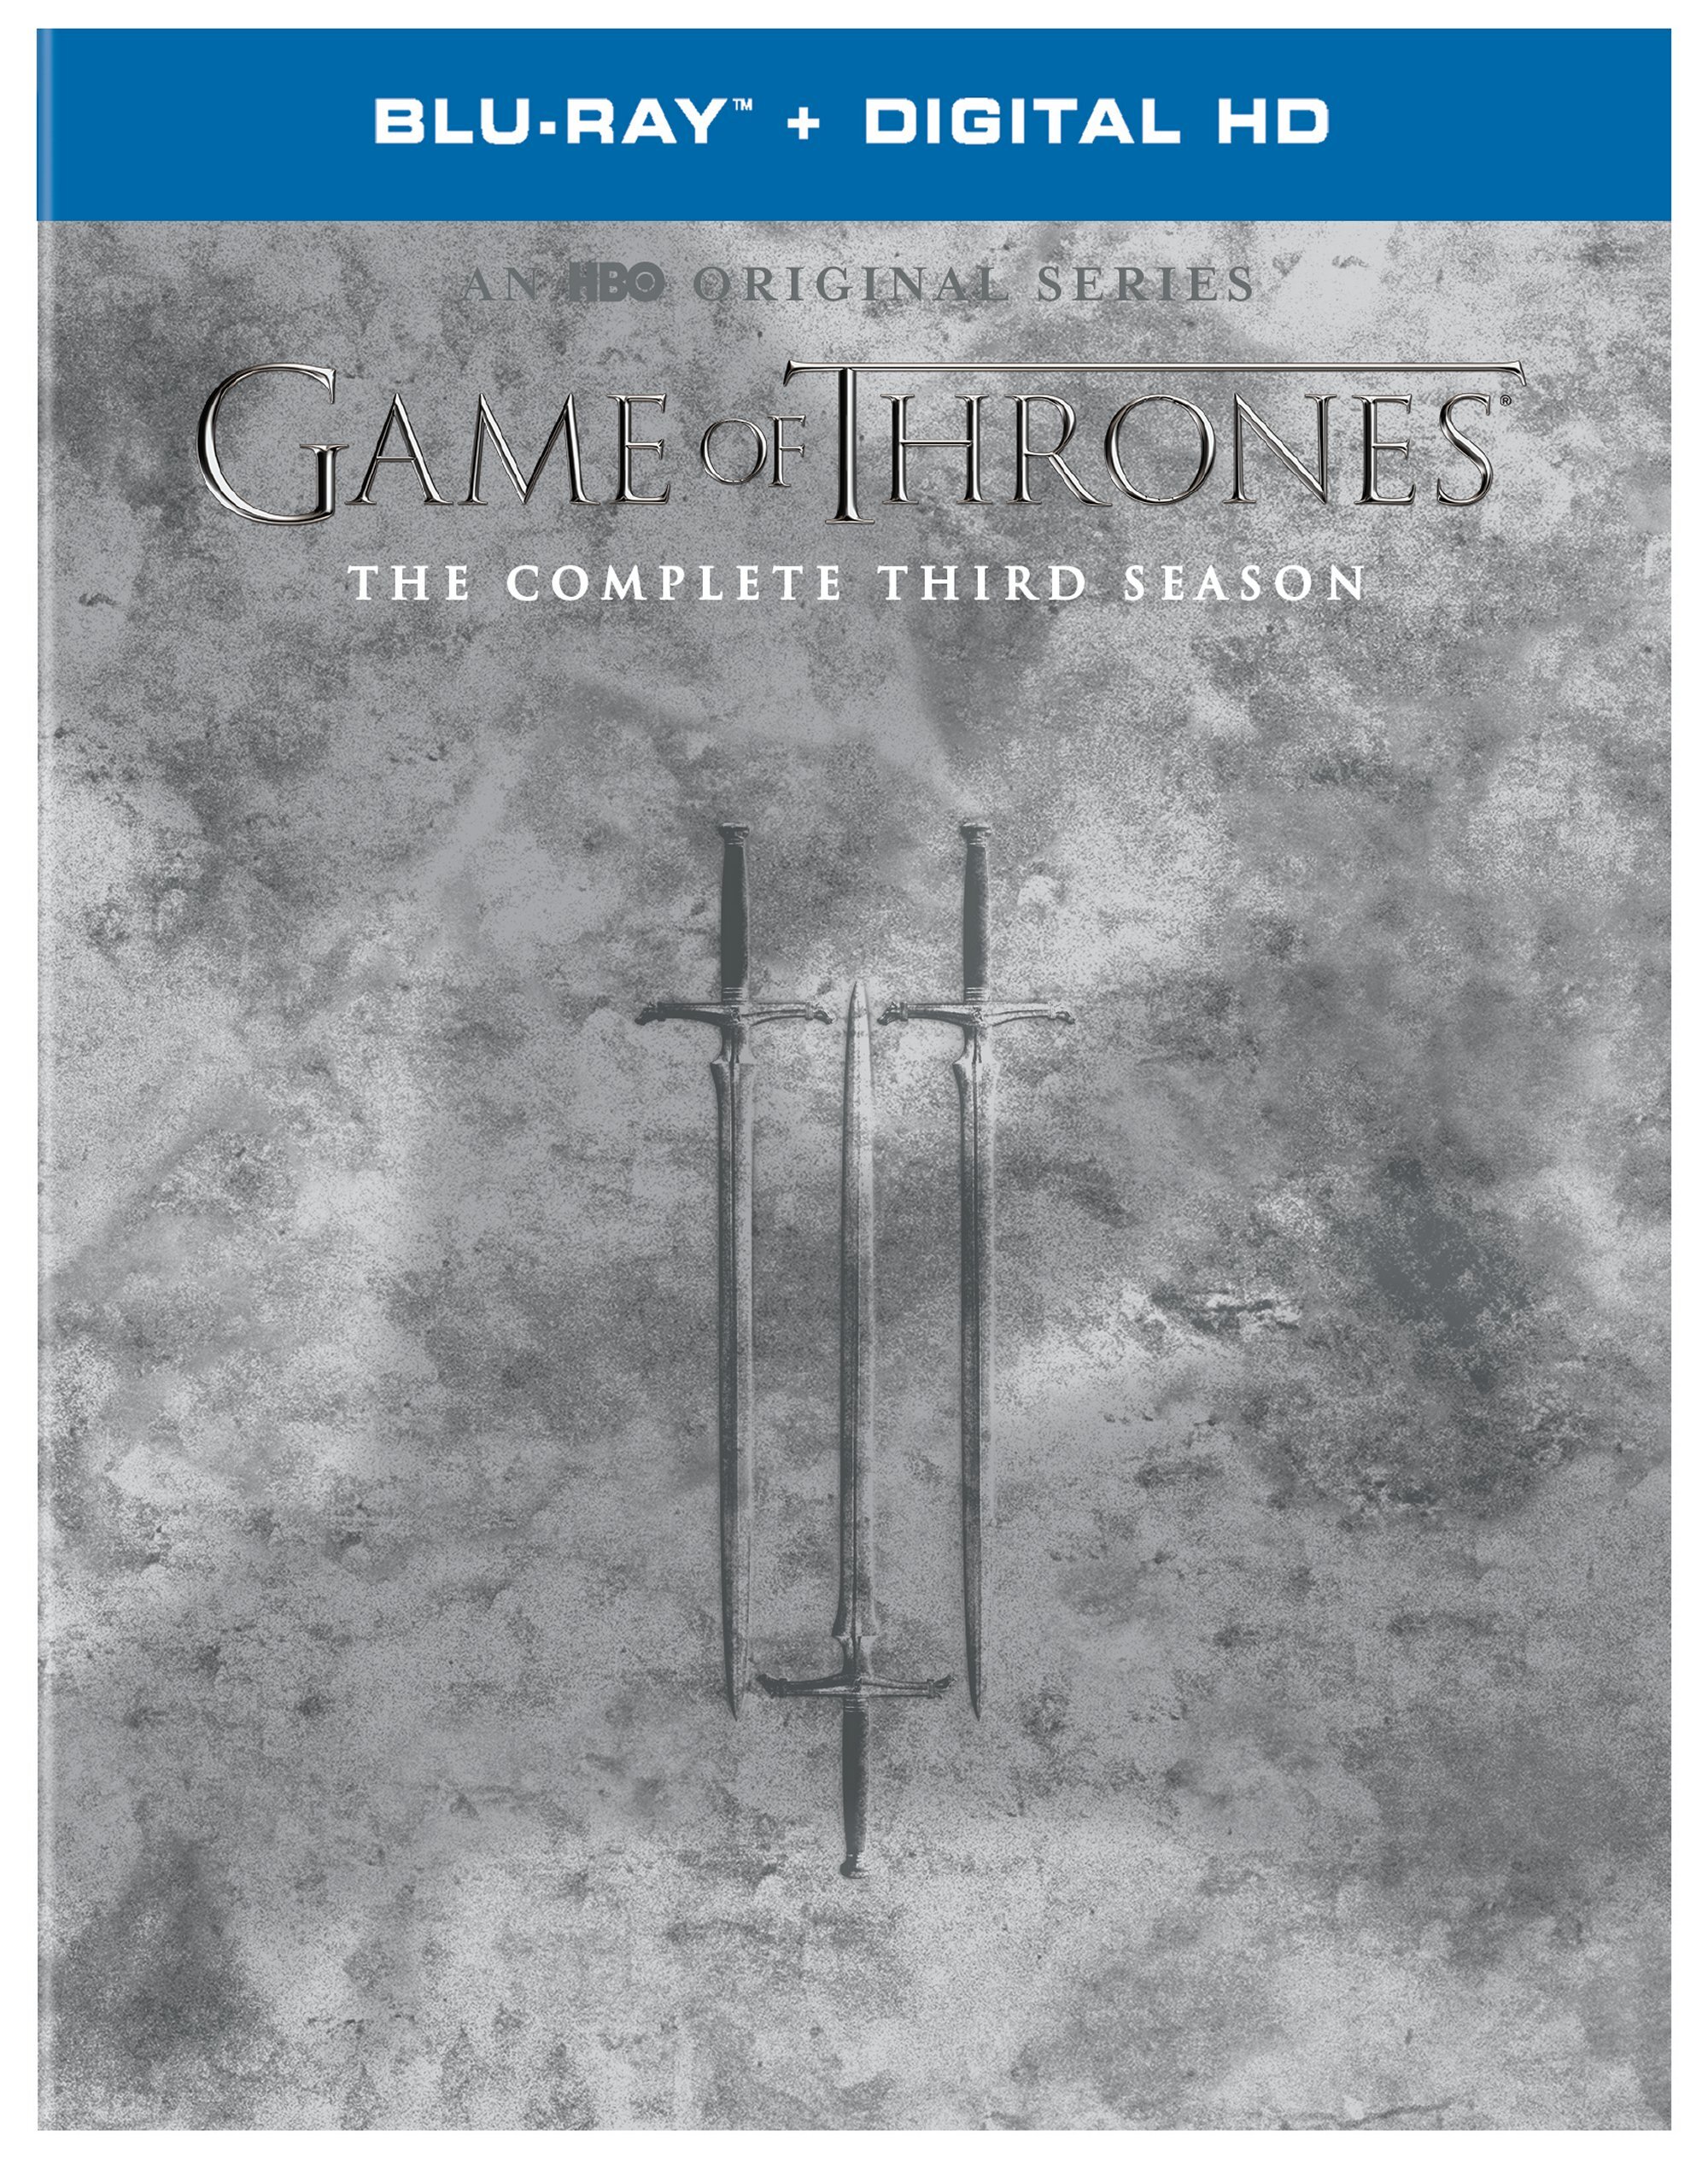 Game Of Thrones: The Complete Third Season (Box Set) - Blu-ray [ 2013 ]  - Sci Fi Television On Blu-ray - TV Shows On GRUV